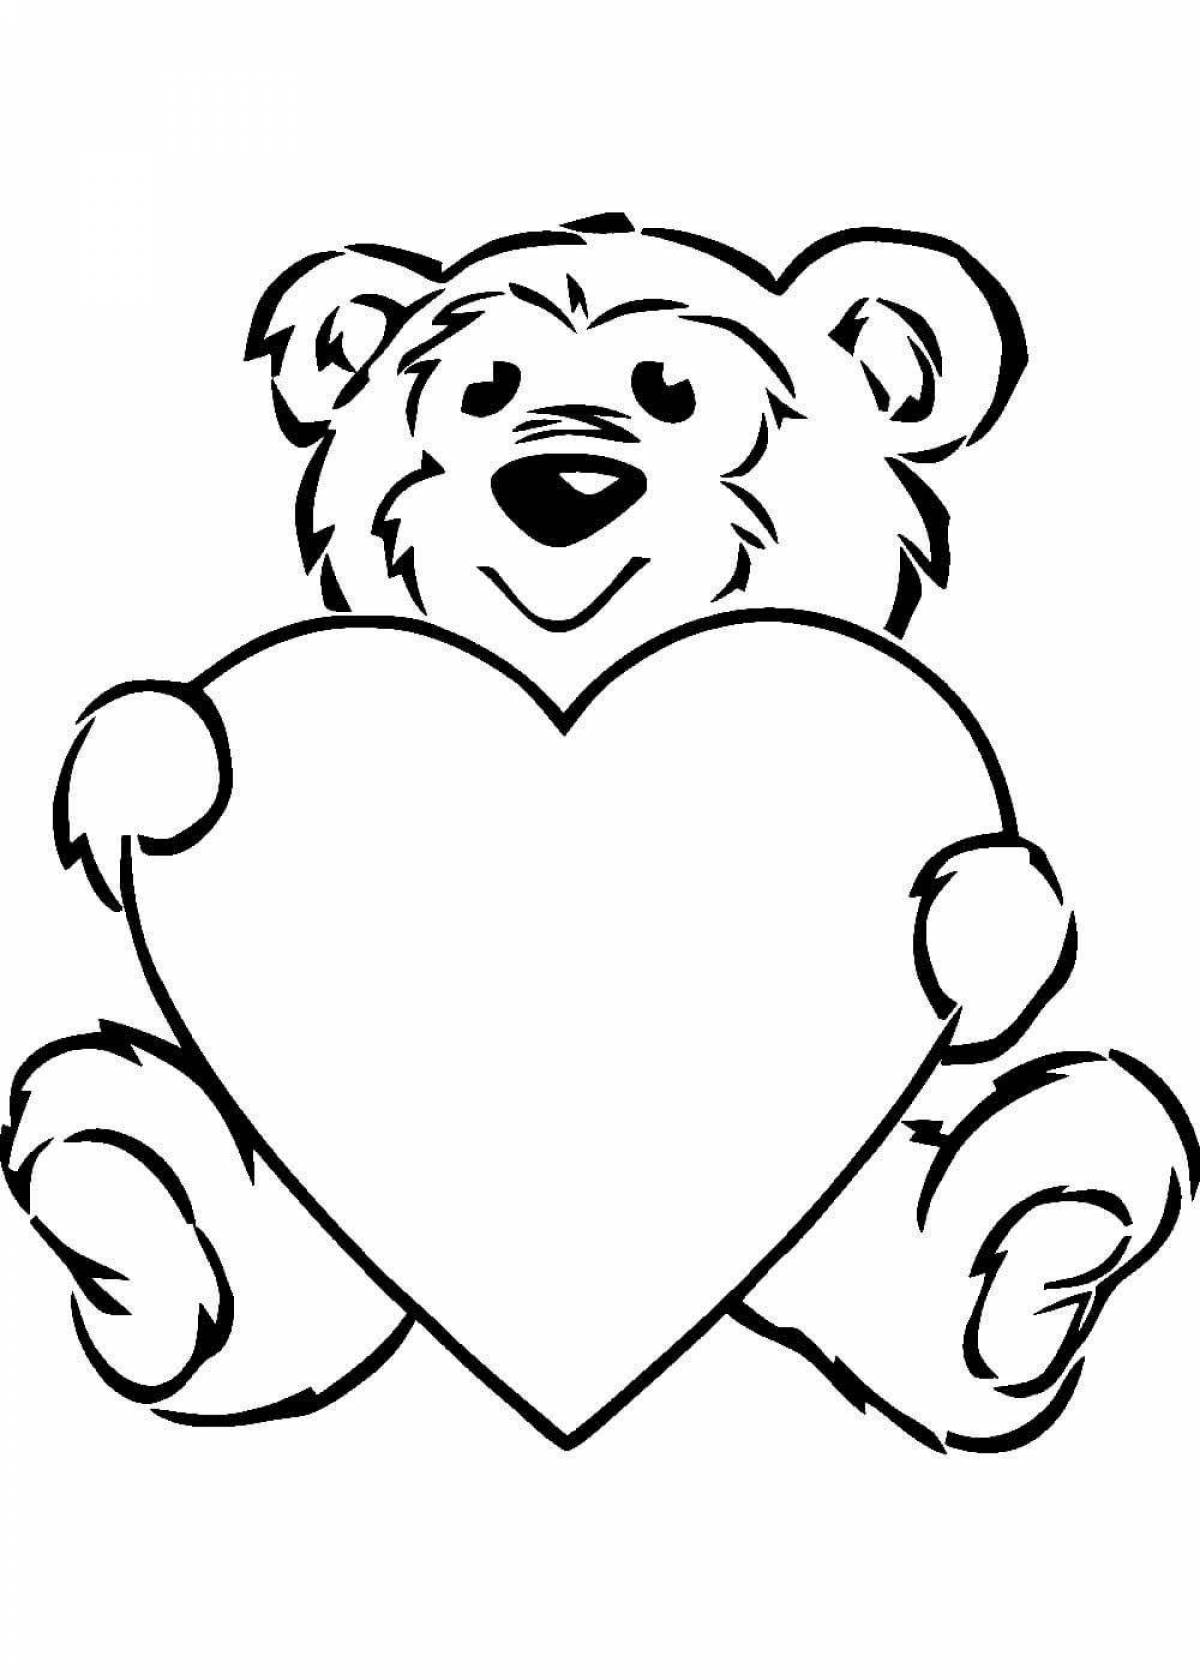 Coloring glowing teddy bear with a heart